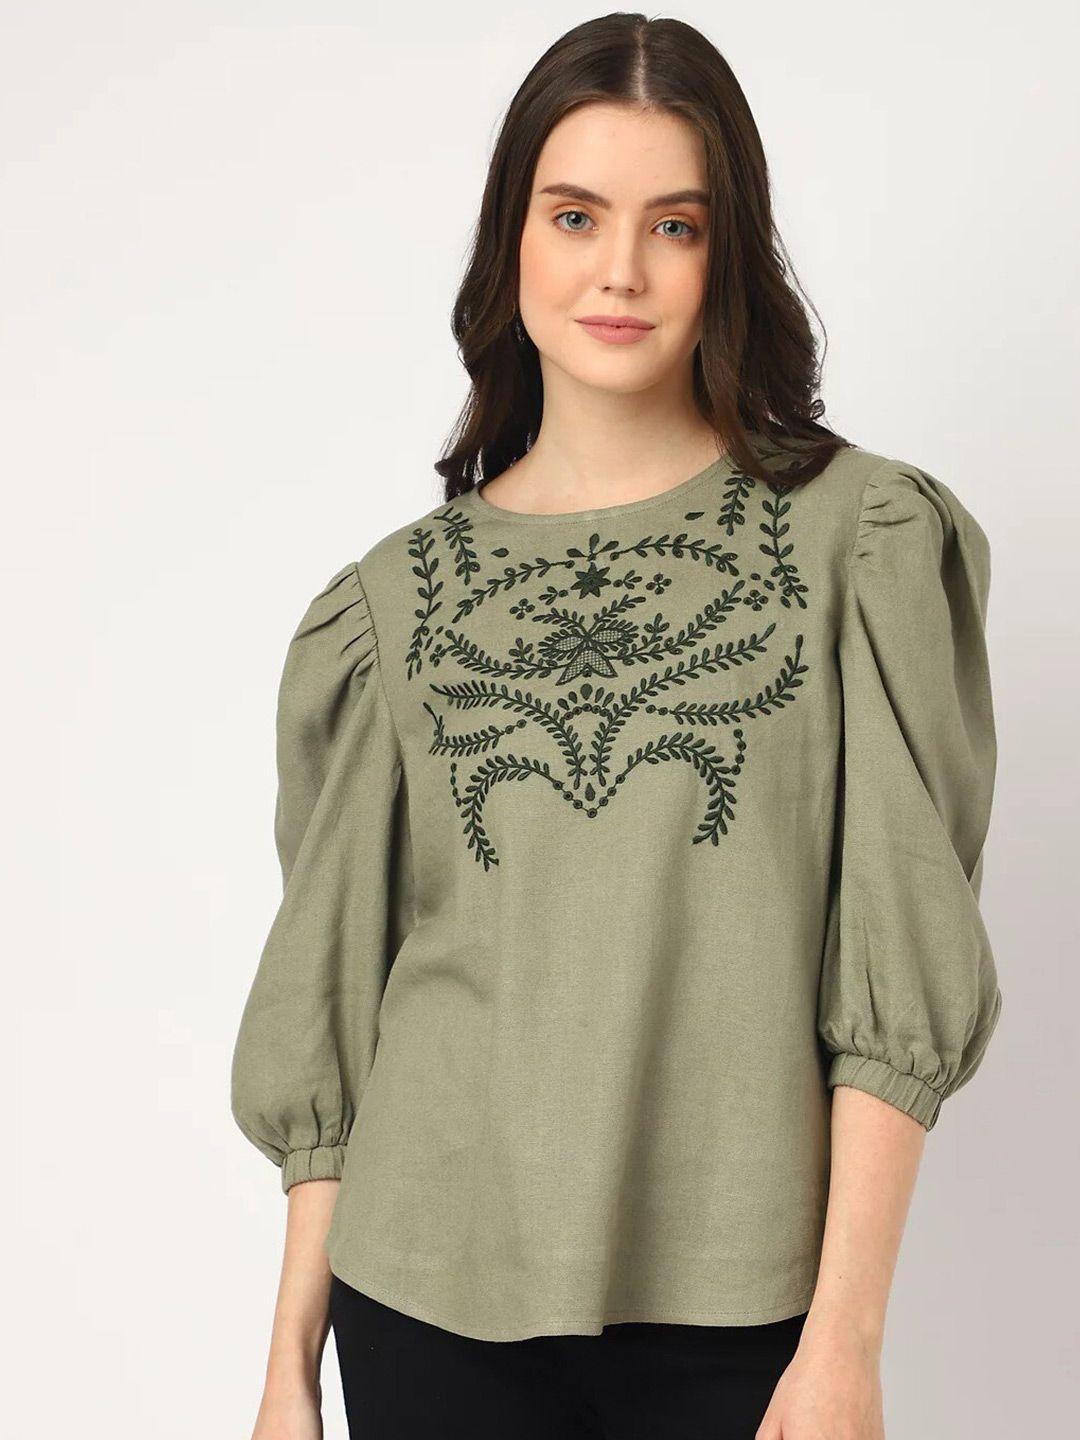 marks & spencer floral printed puff sleeves linen top